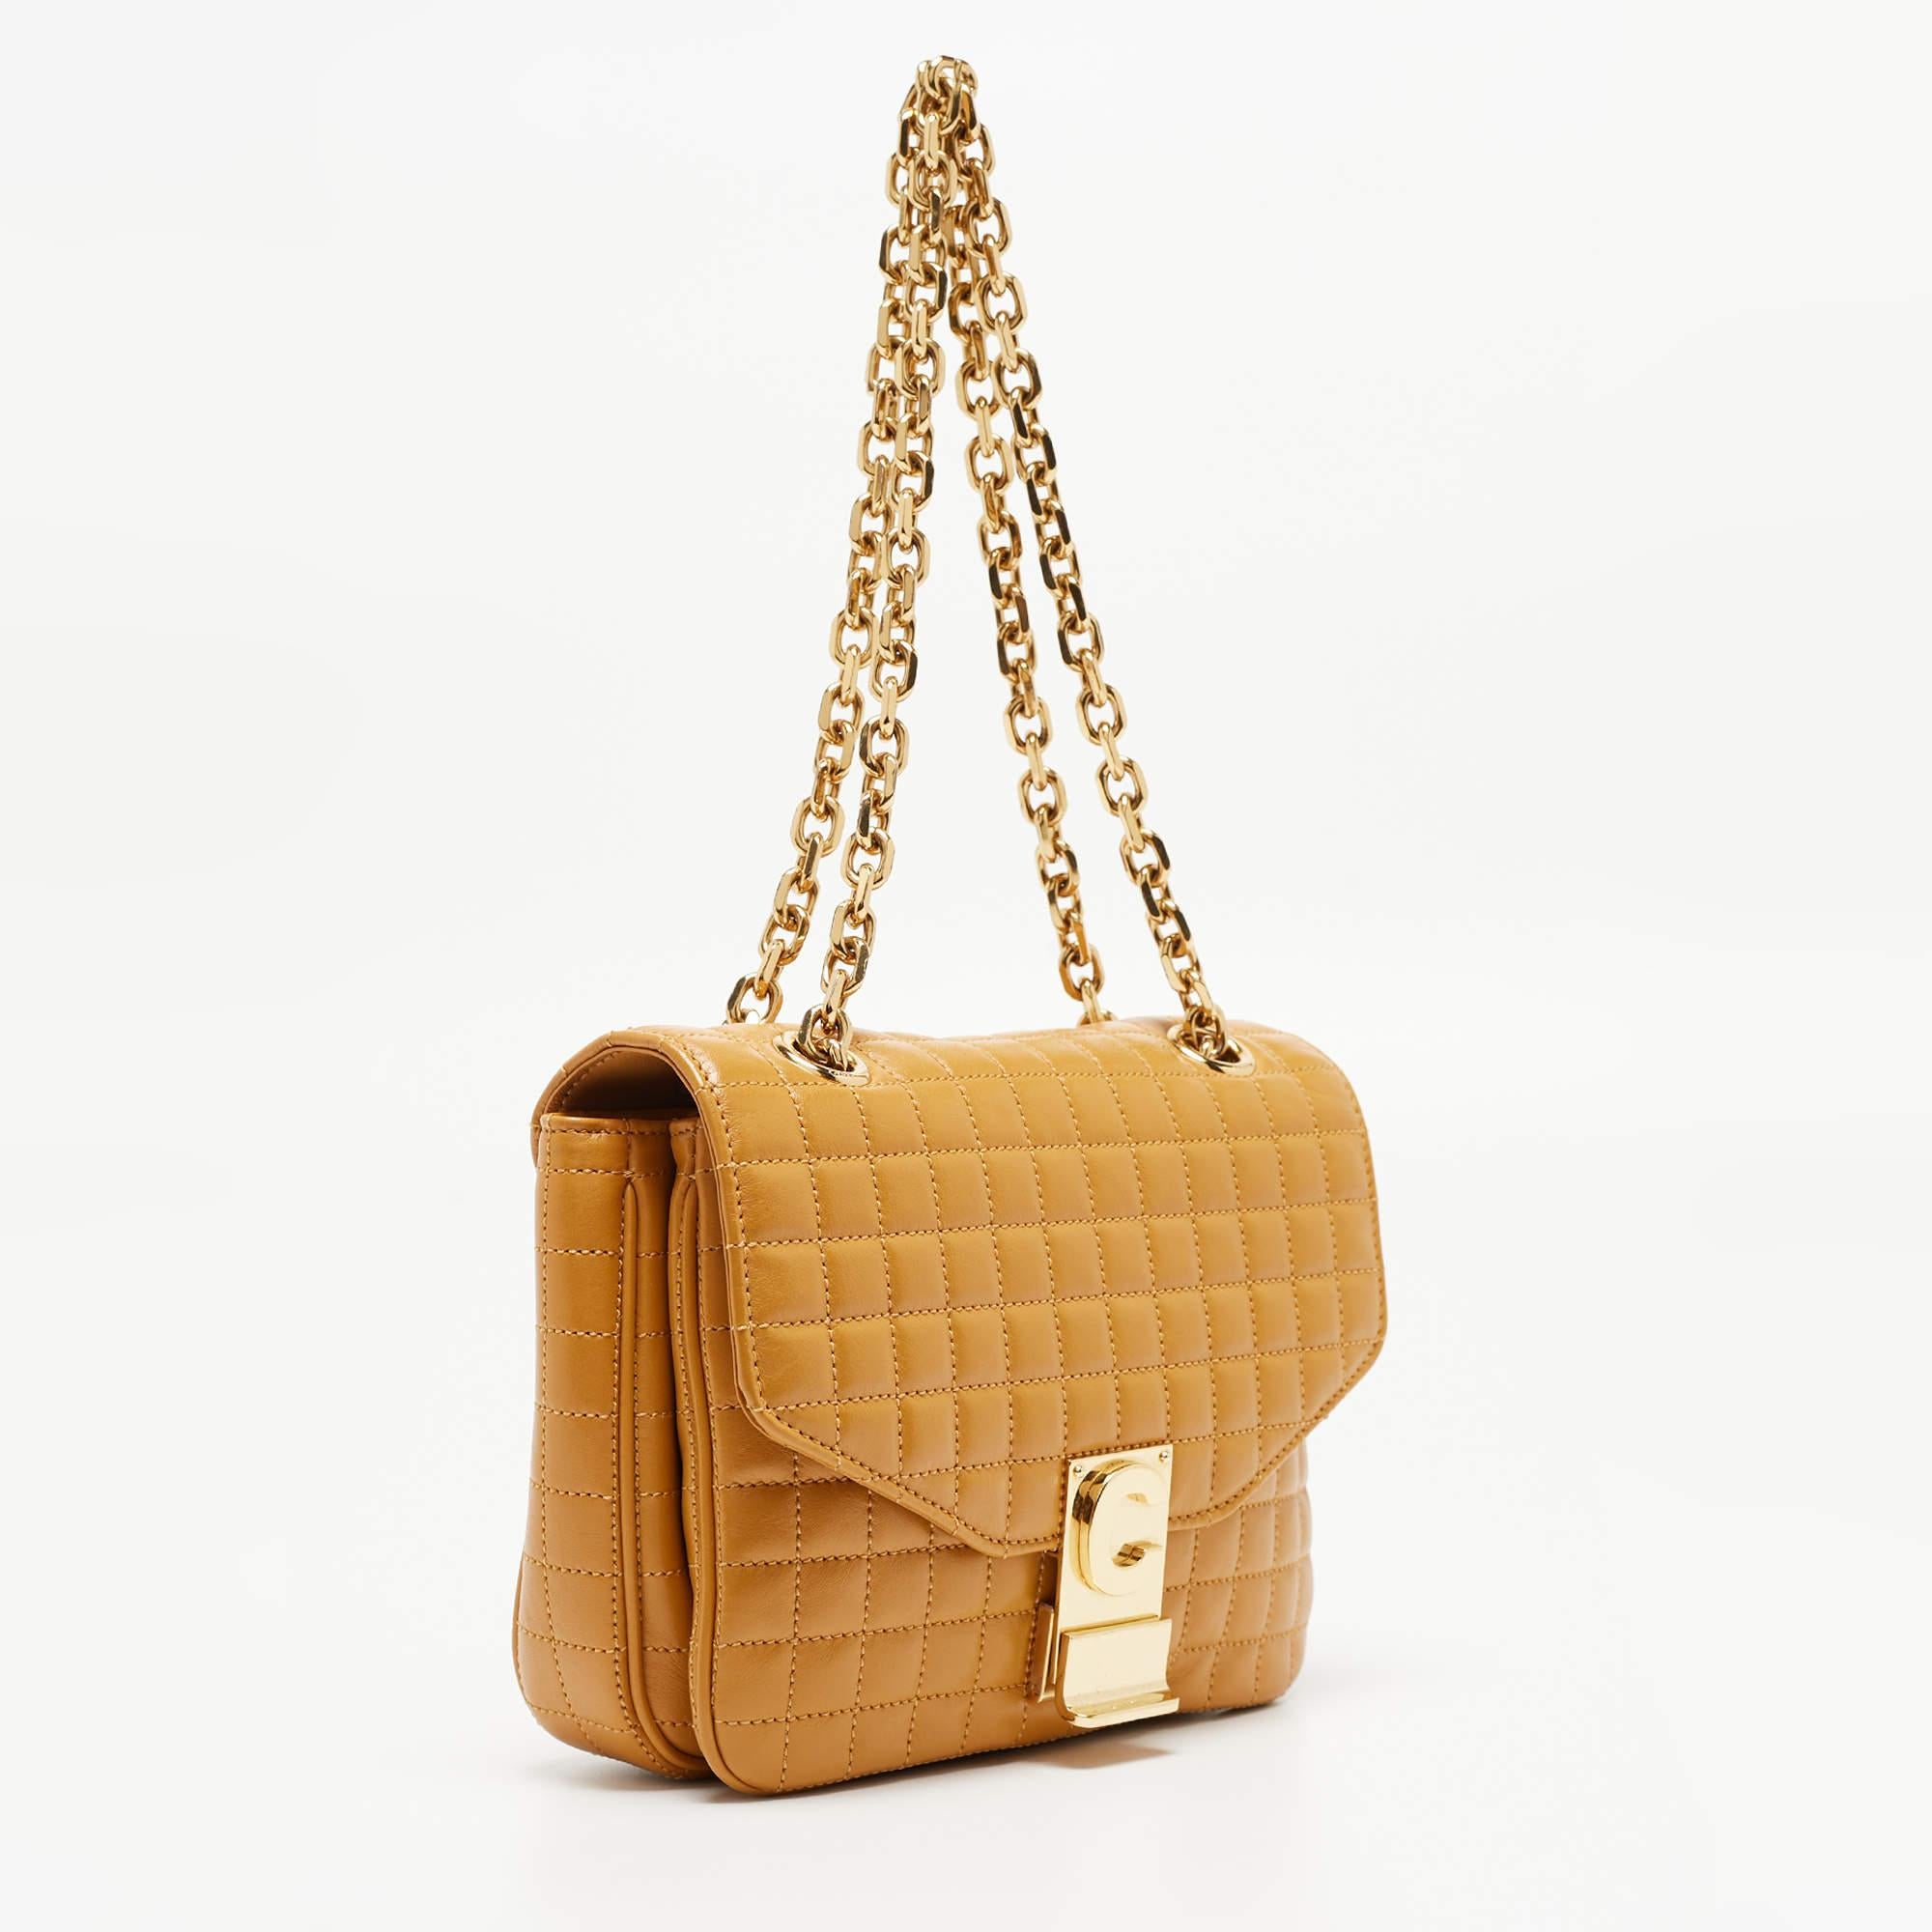 Celine Tan Quilted Leather Small C Flap Bag For Sale 5